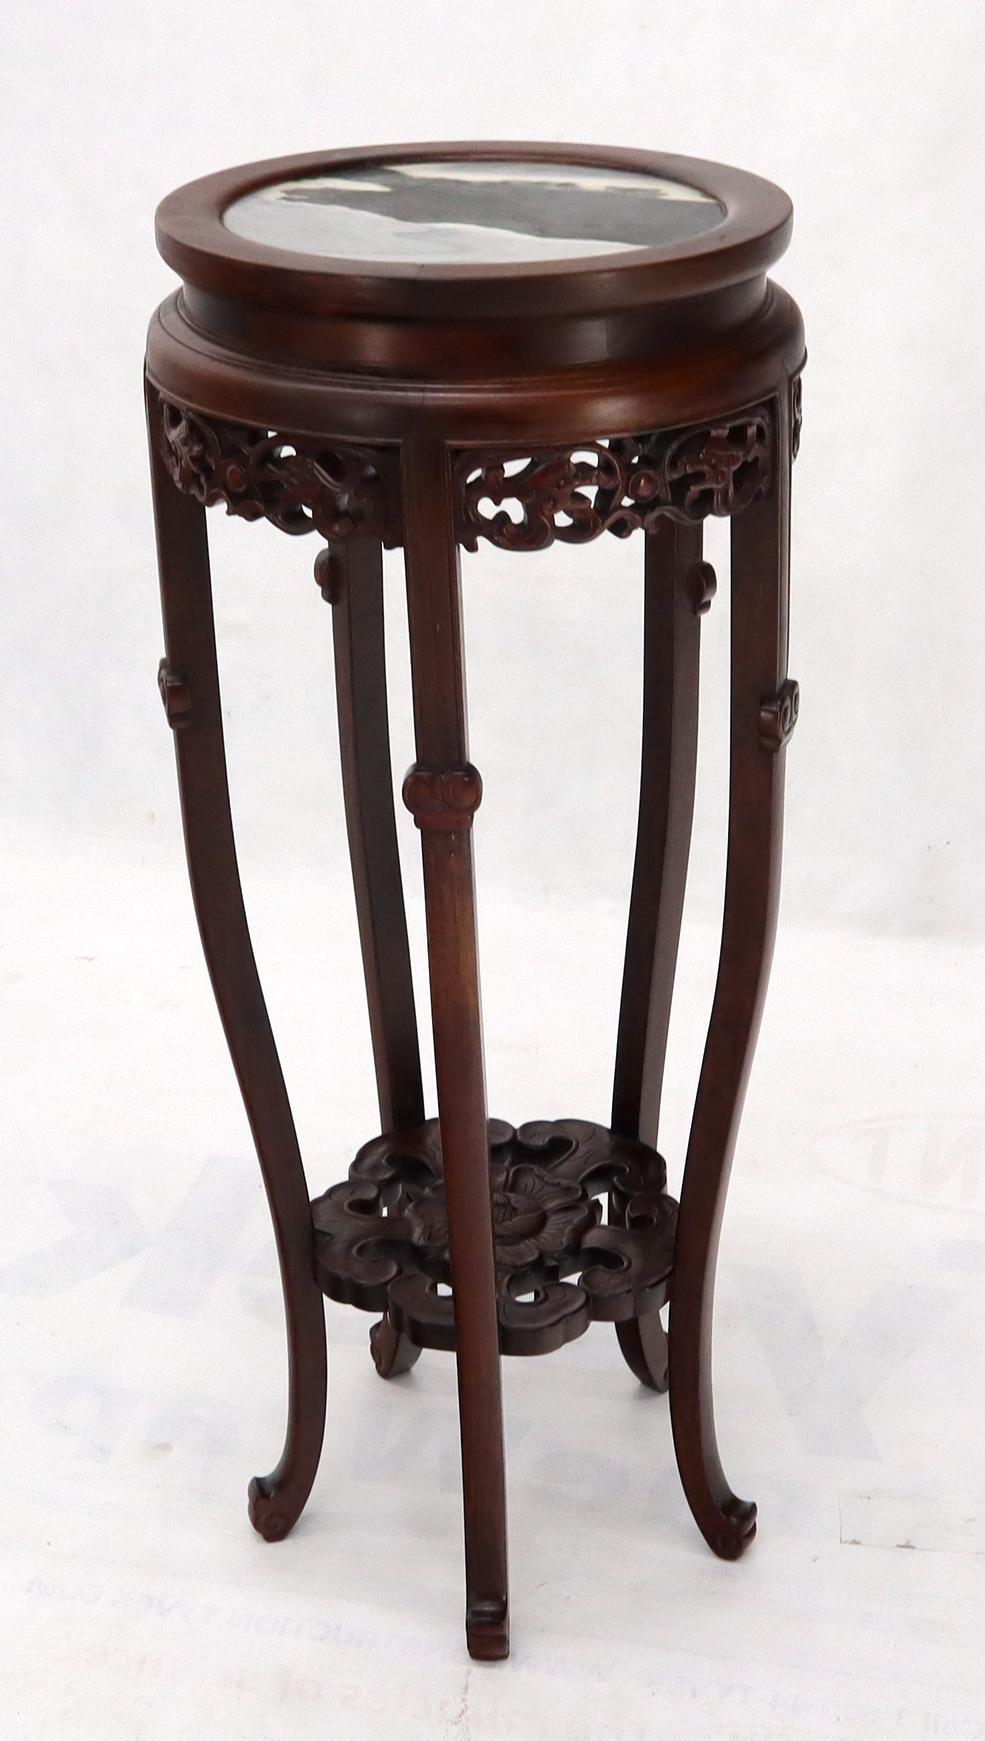 High quality vintage Chinese Asian carved rosewood marble top lamp table round stand pedestal.